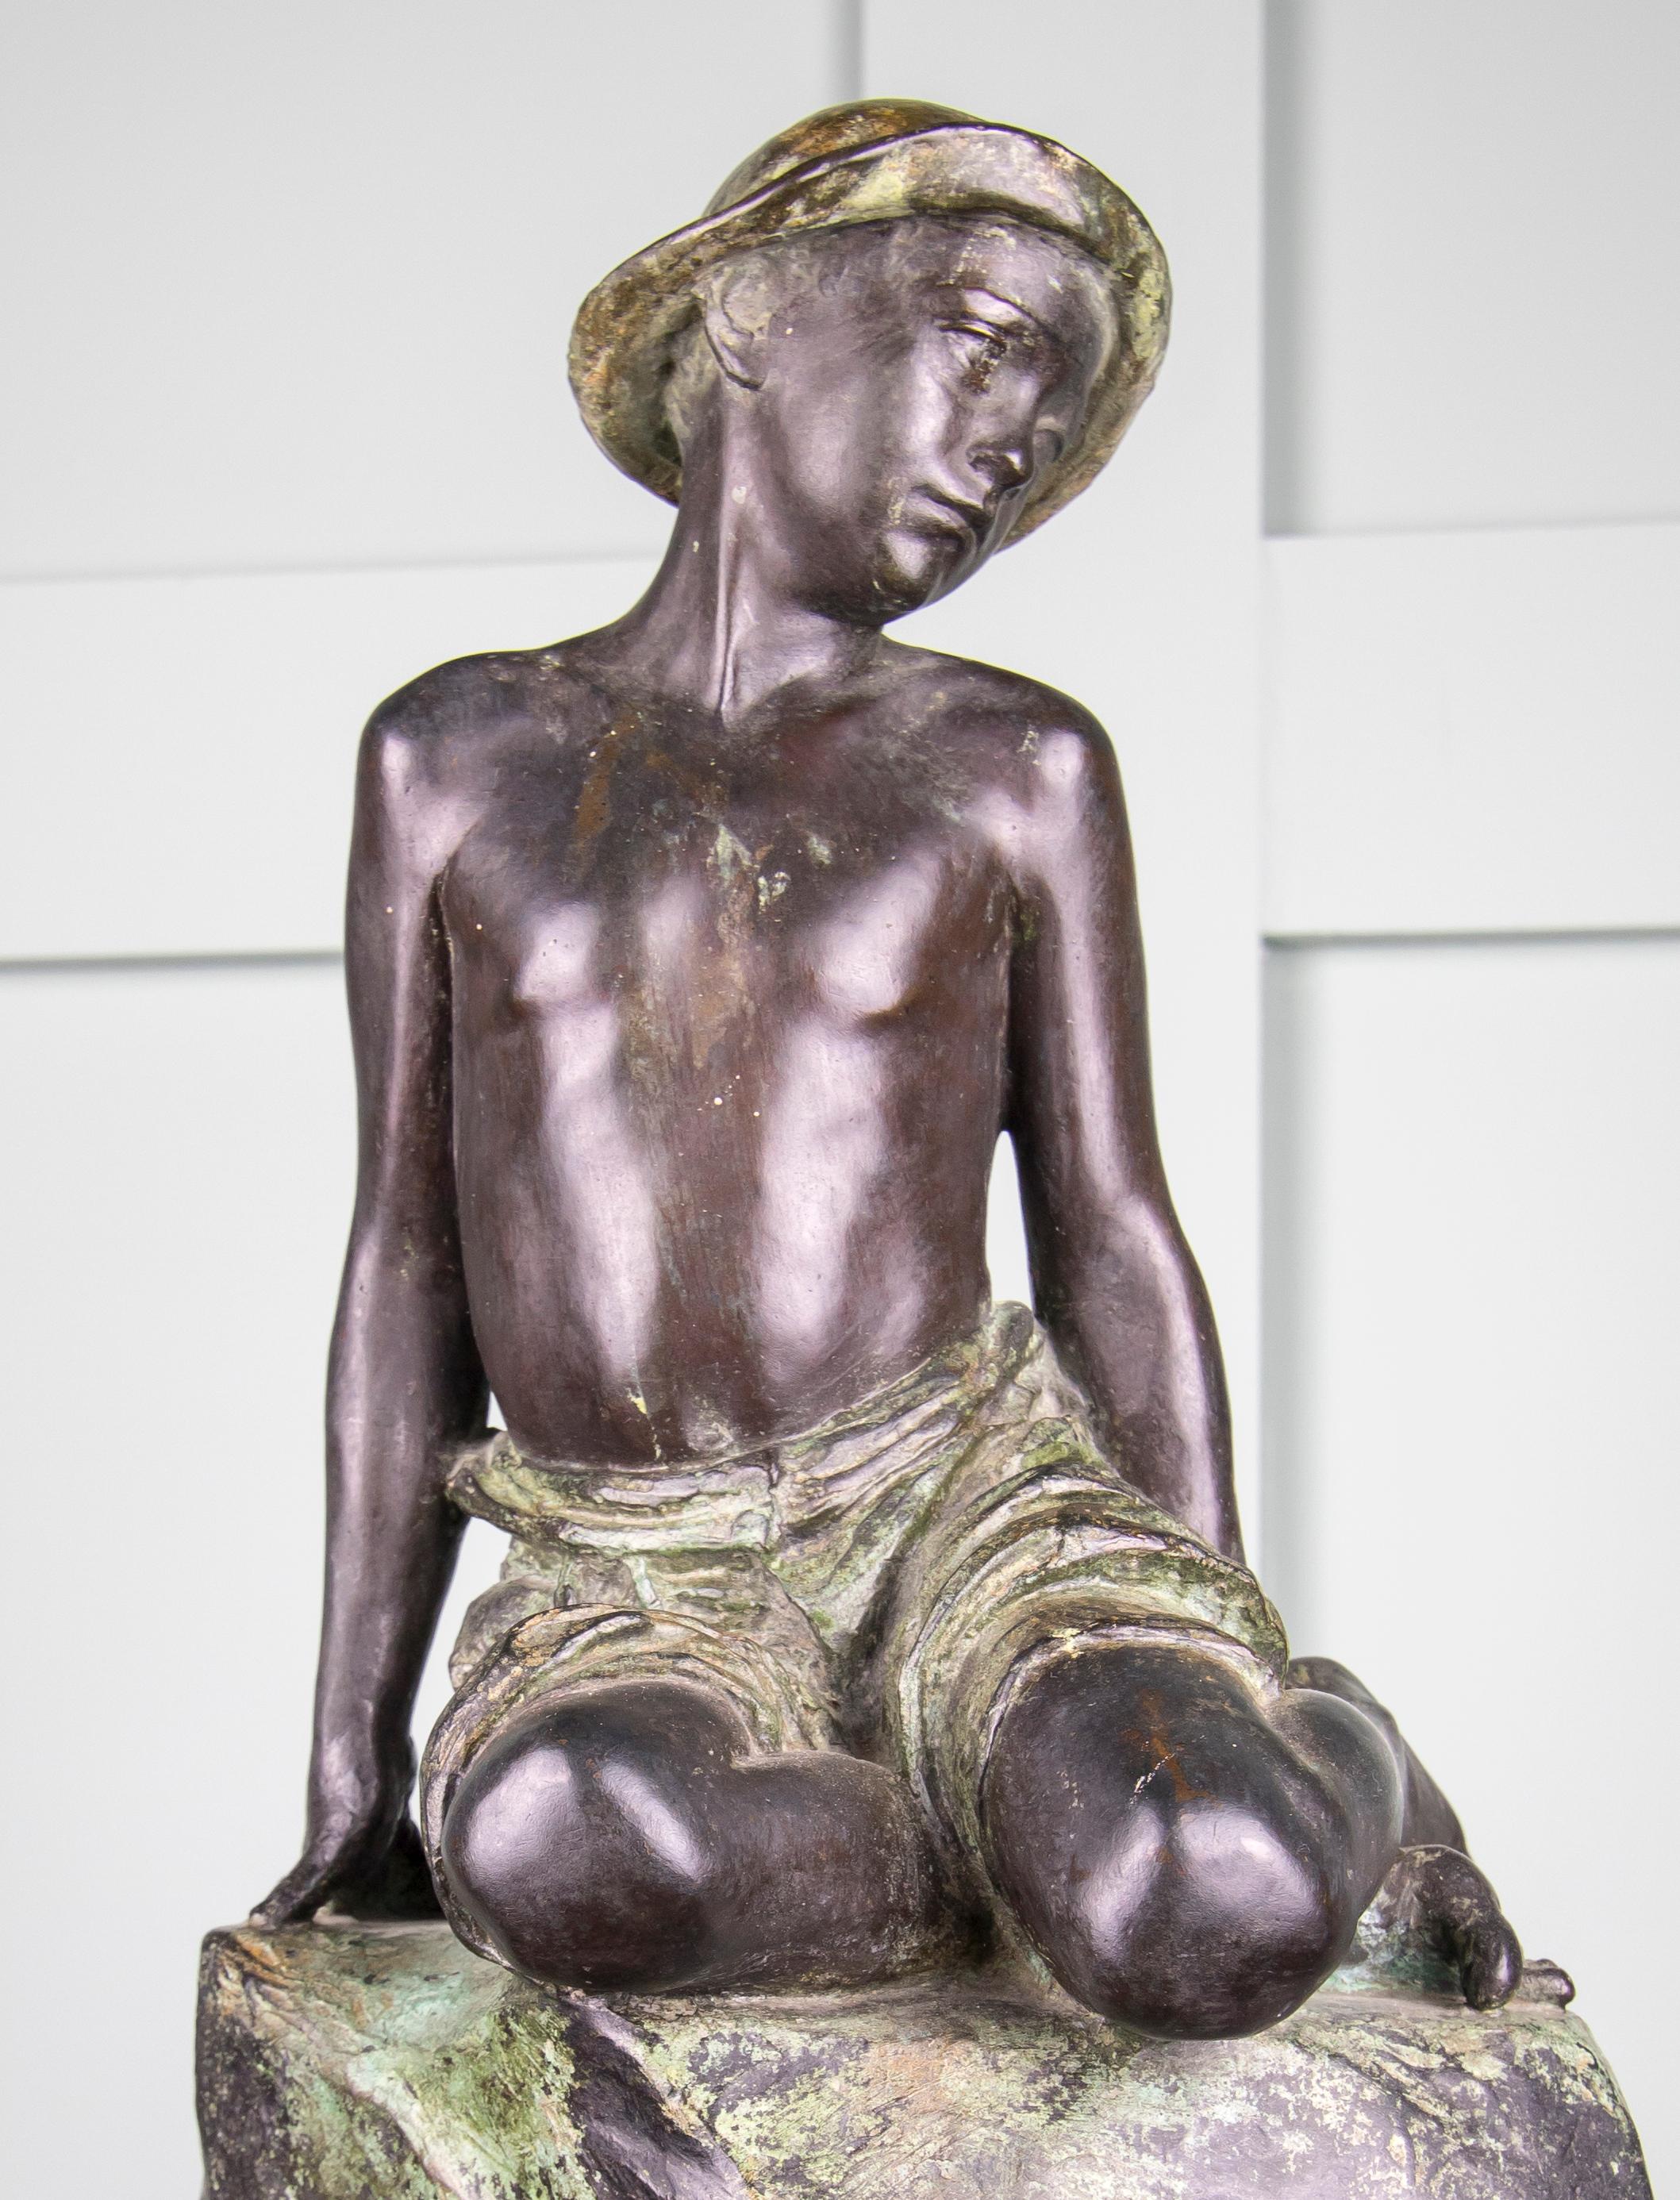 This very endearing bronze depicts a young male figure sitting upon a rock. Dated 1919 Roma with signature as seen in the images, unknown sculptor. Beautifully worked and in good condition.